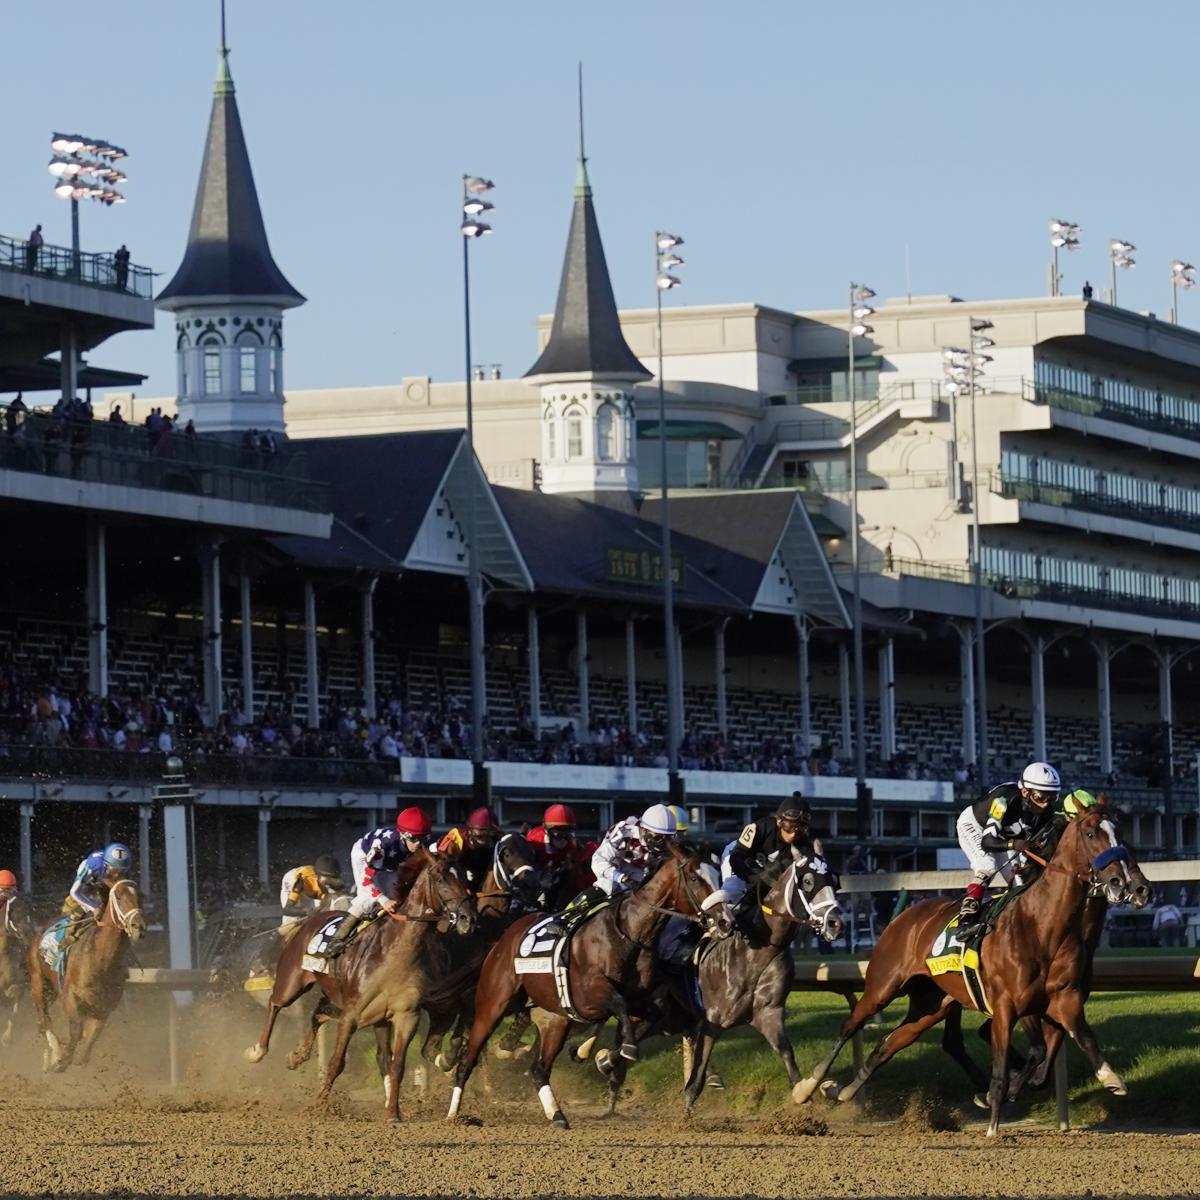 Kentucky Derby 2021: Race Schedule and Predictions for Top Contenders